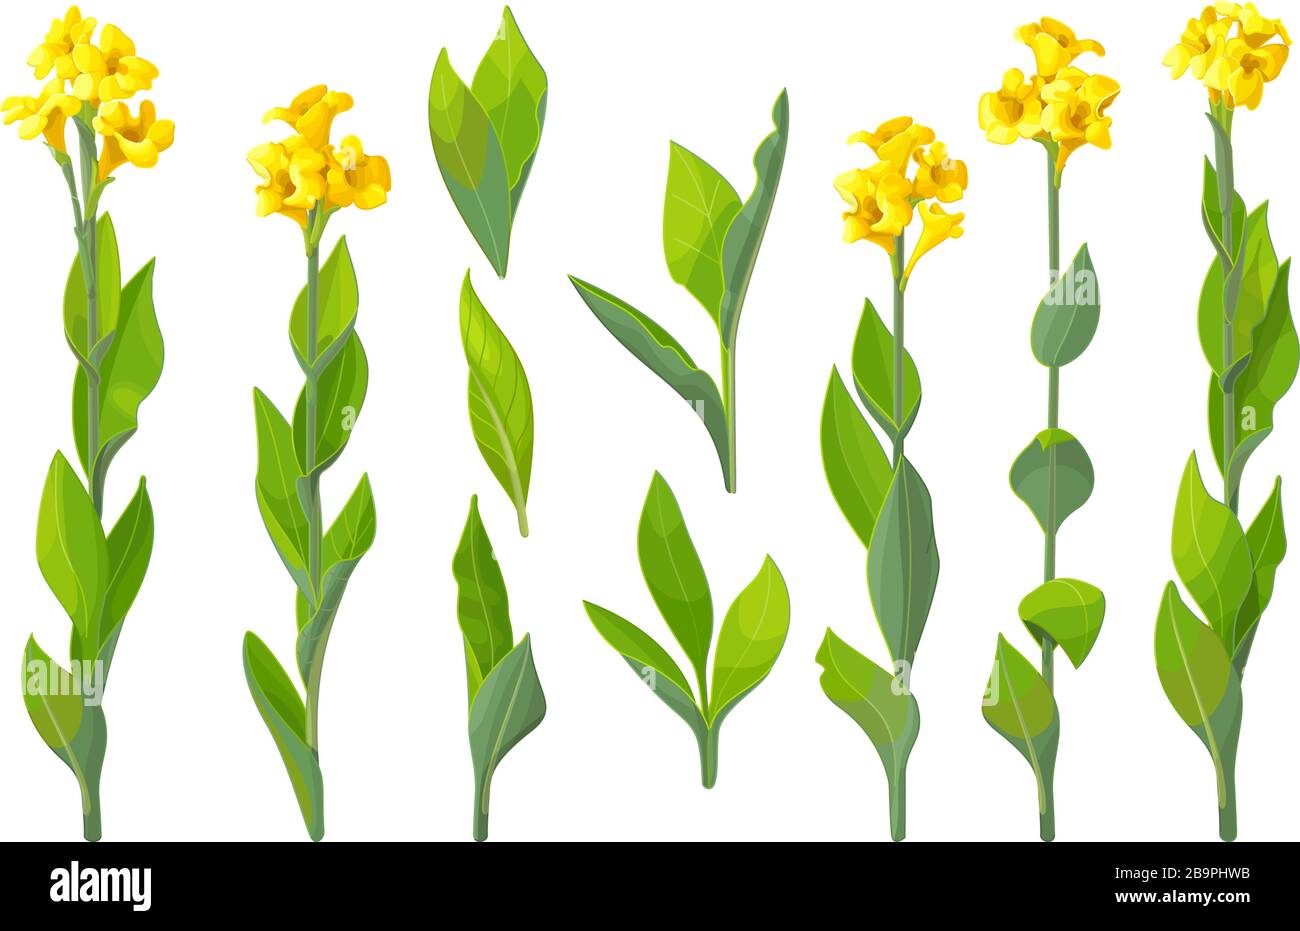 vector handdrawn plant clipart Canna lily flowers set Stock Vector